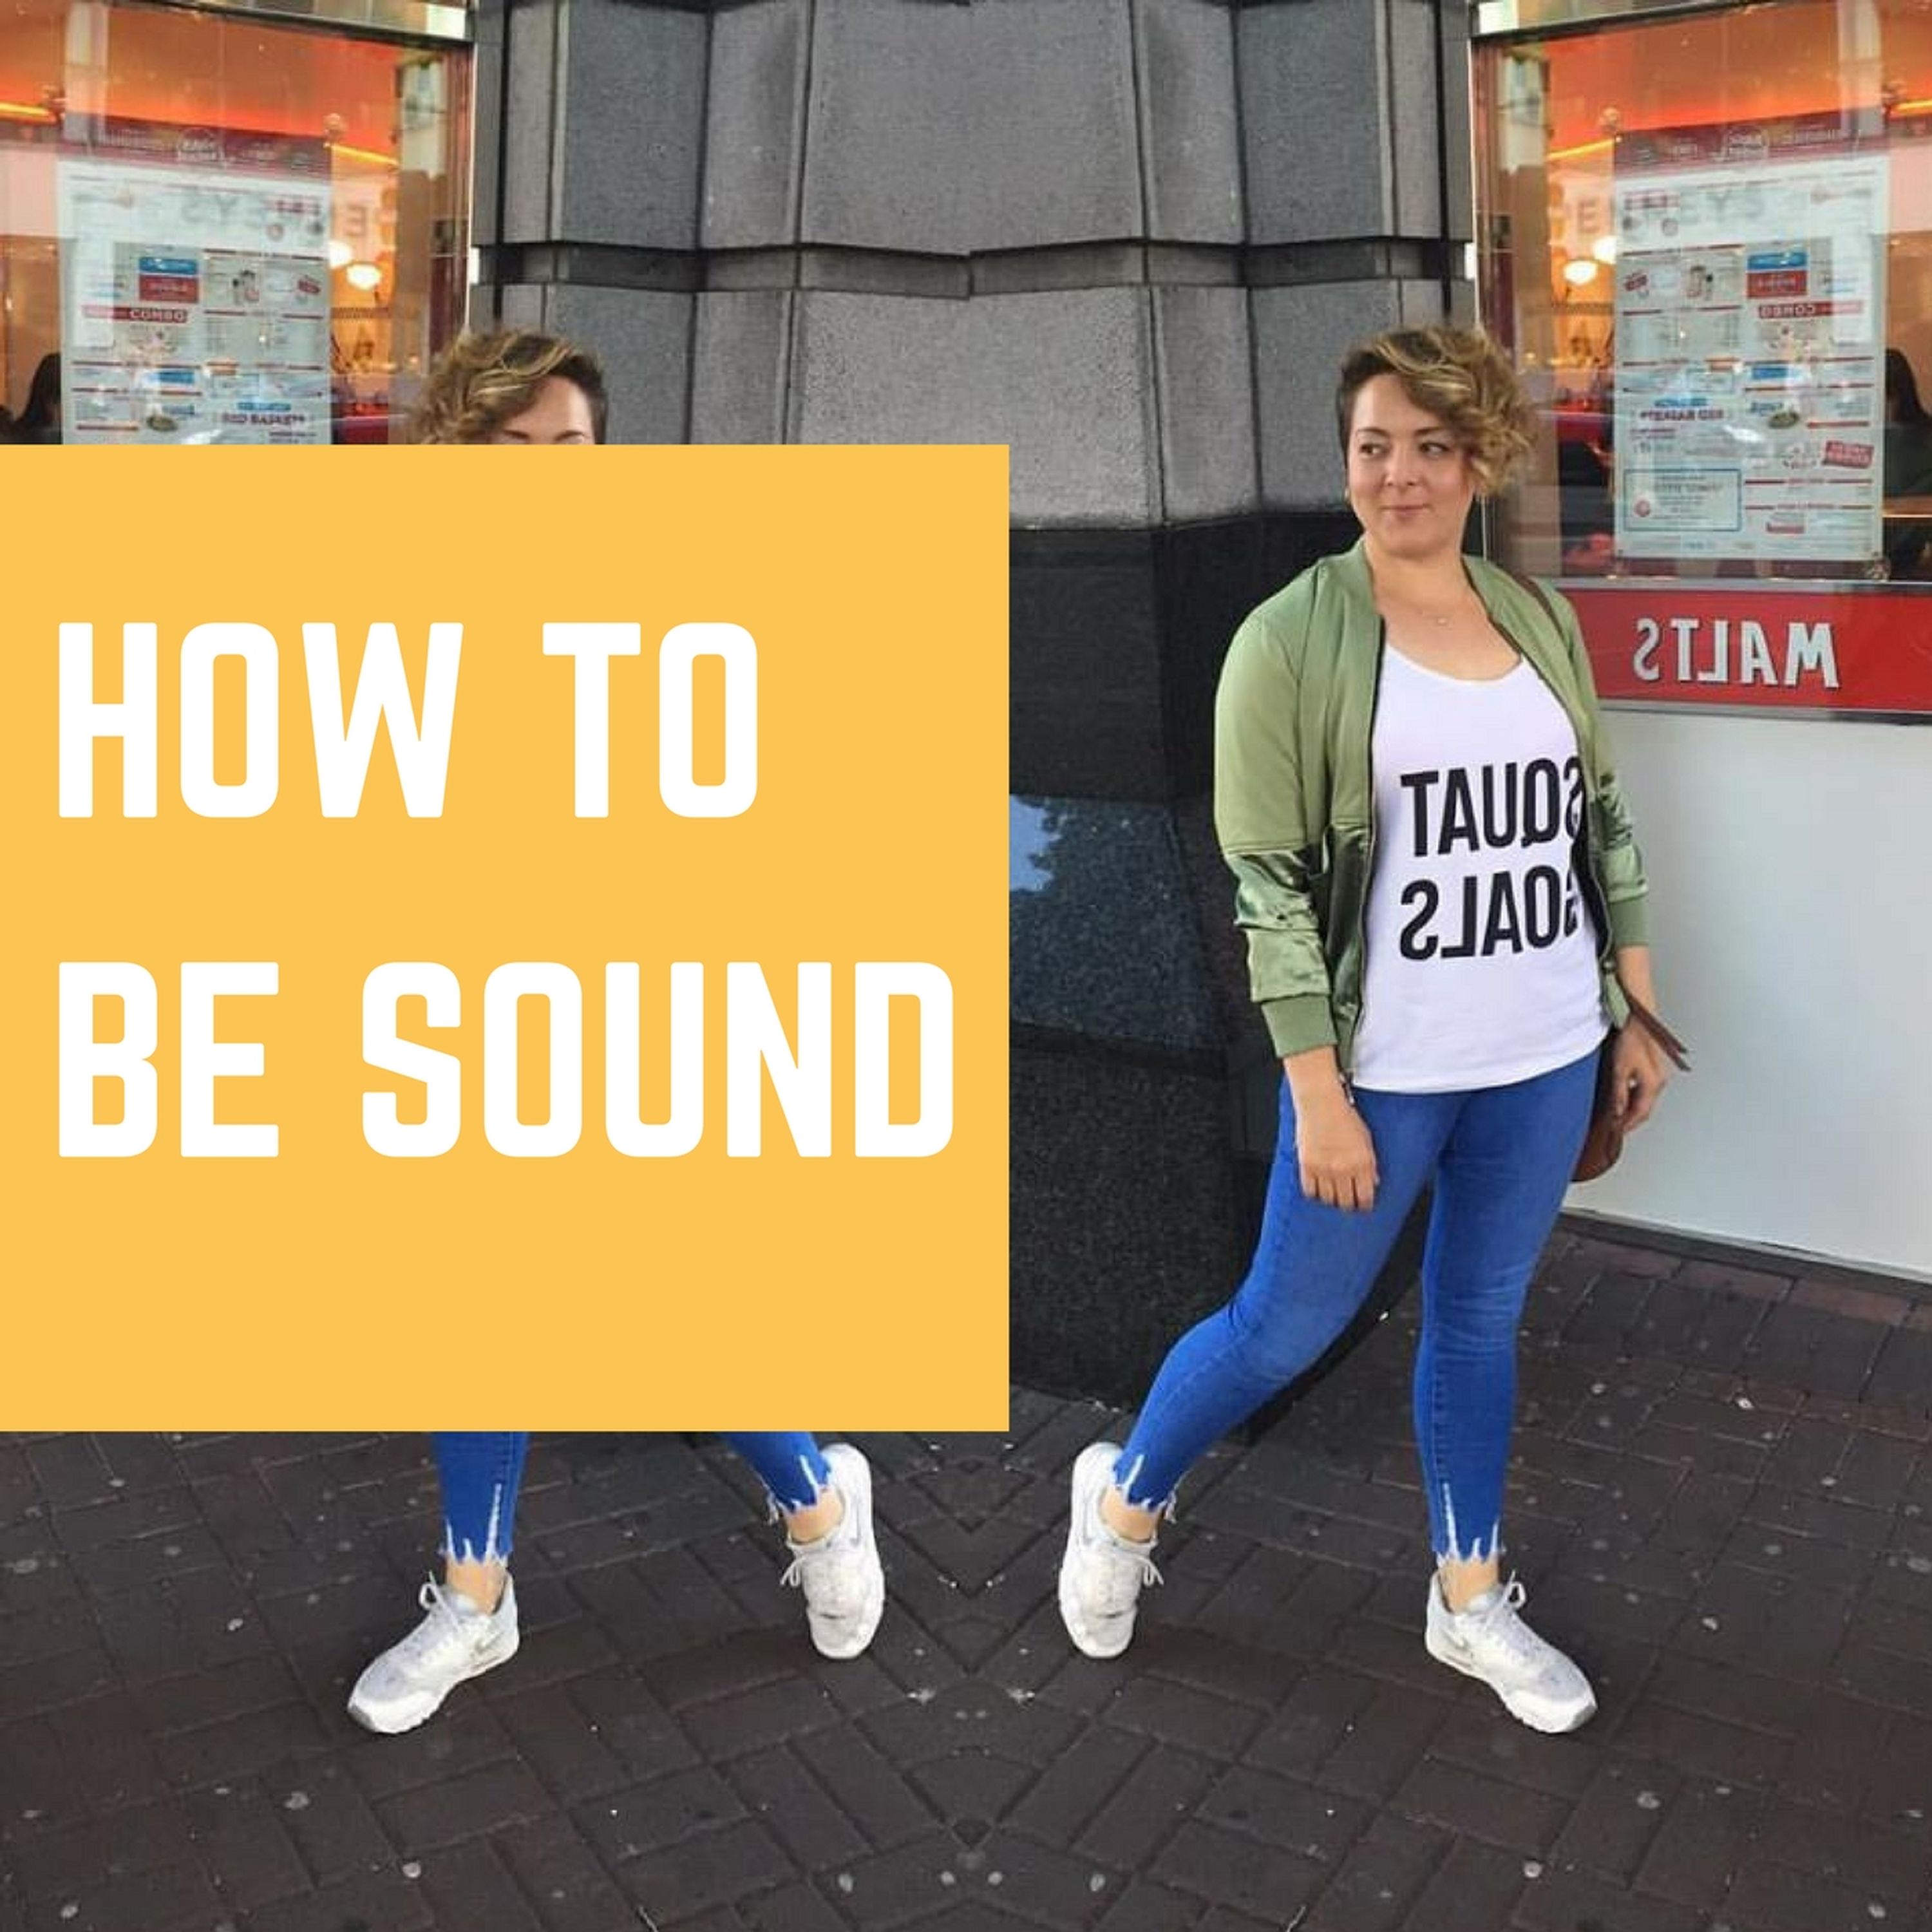 Julie Jay on how to be sound